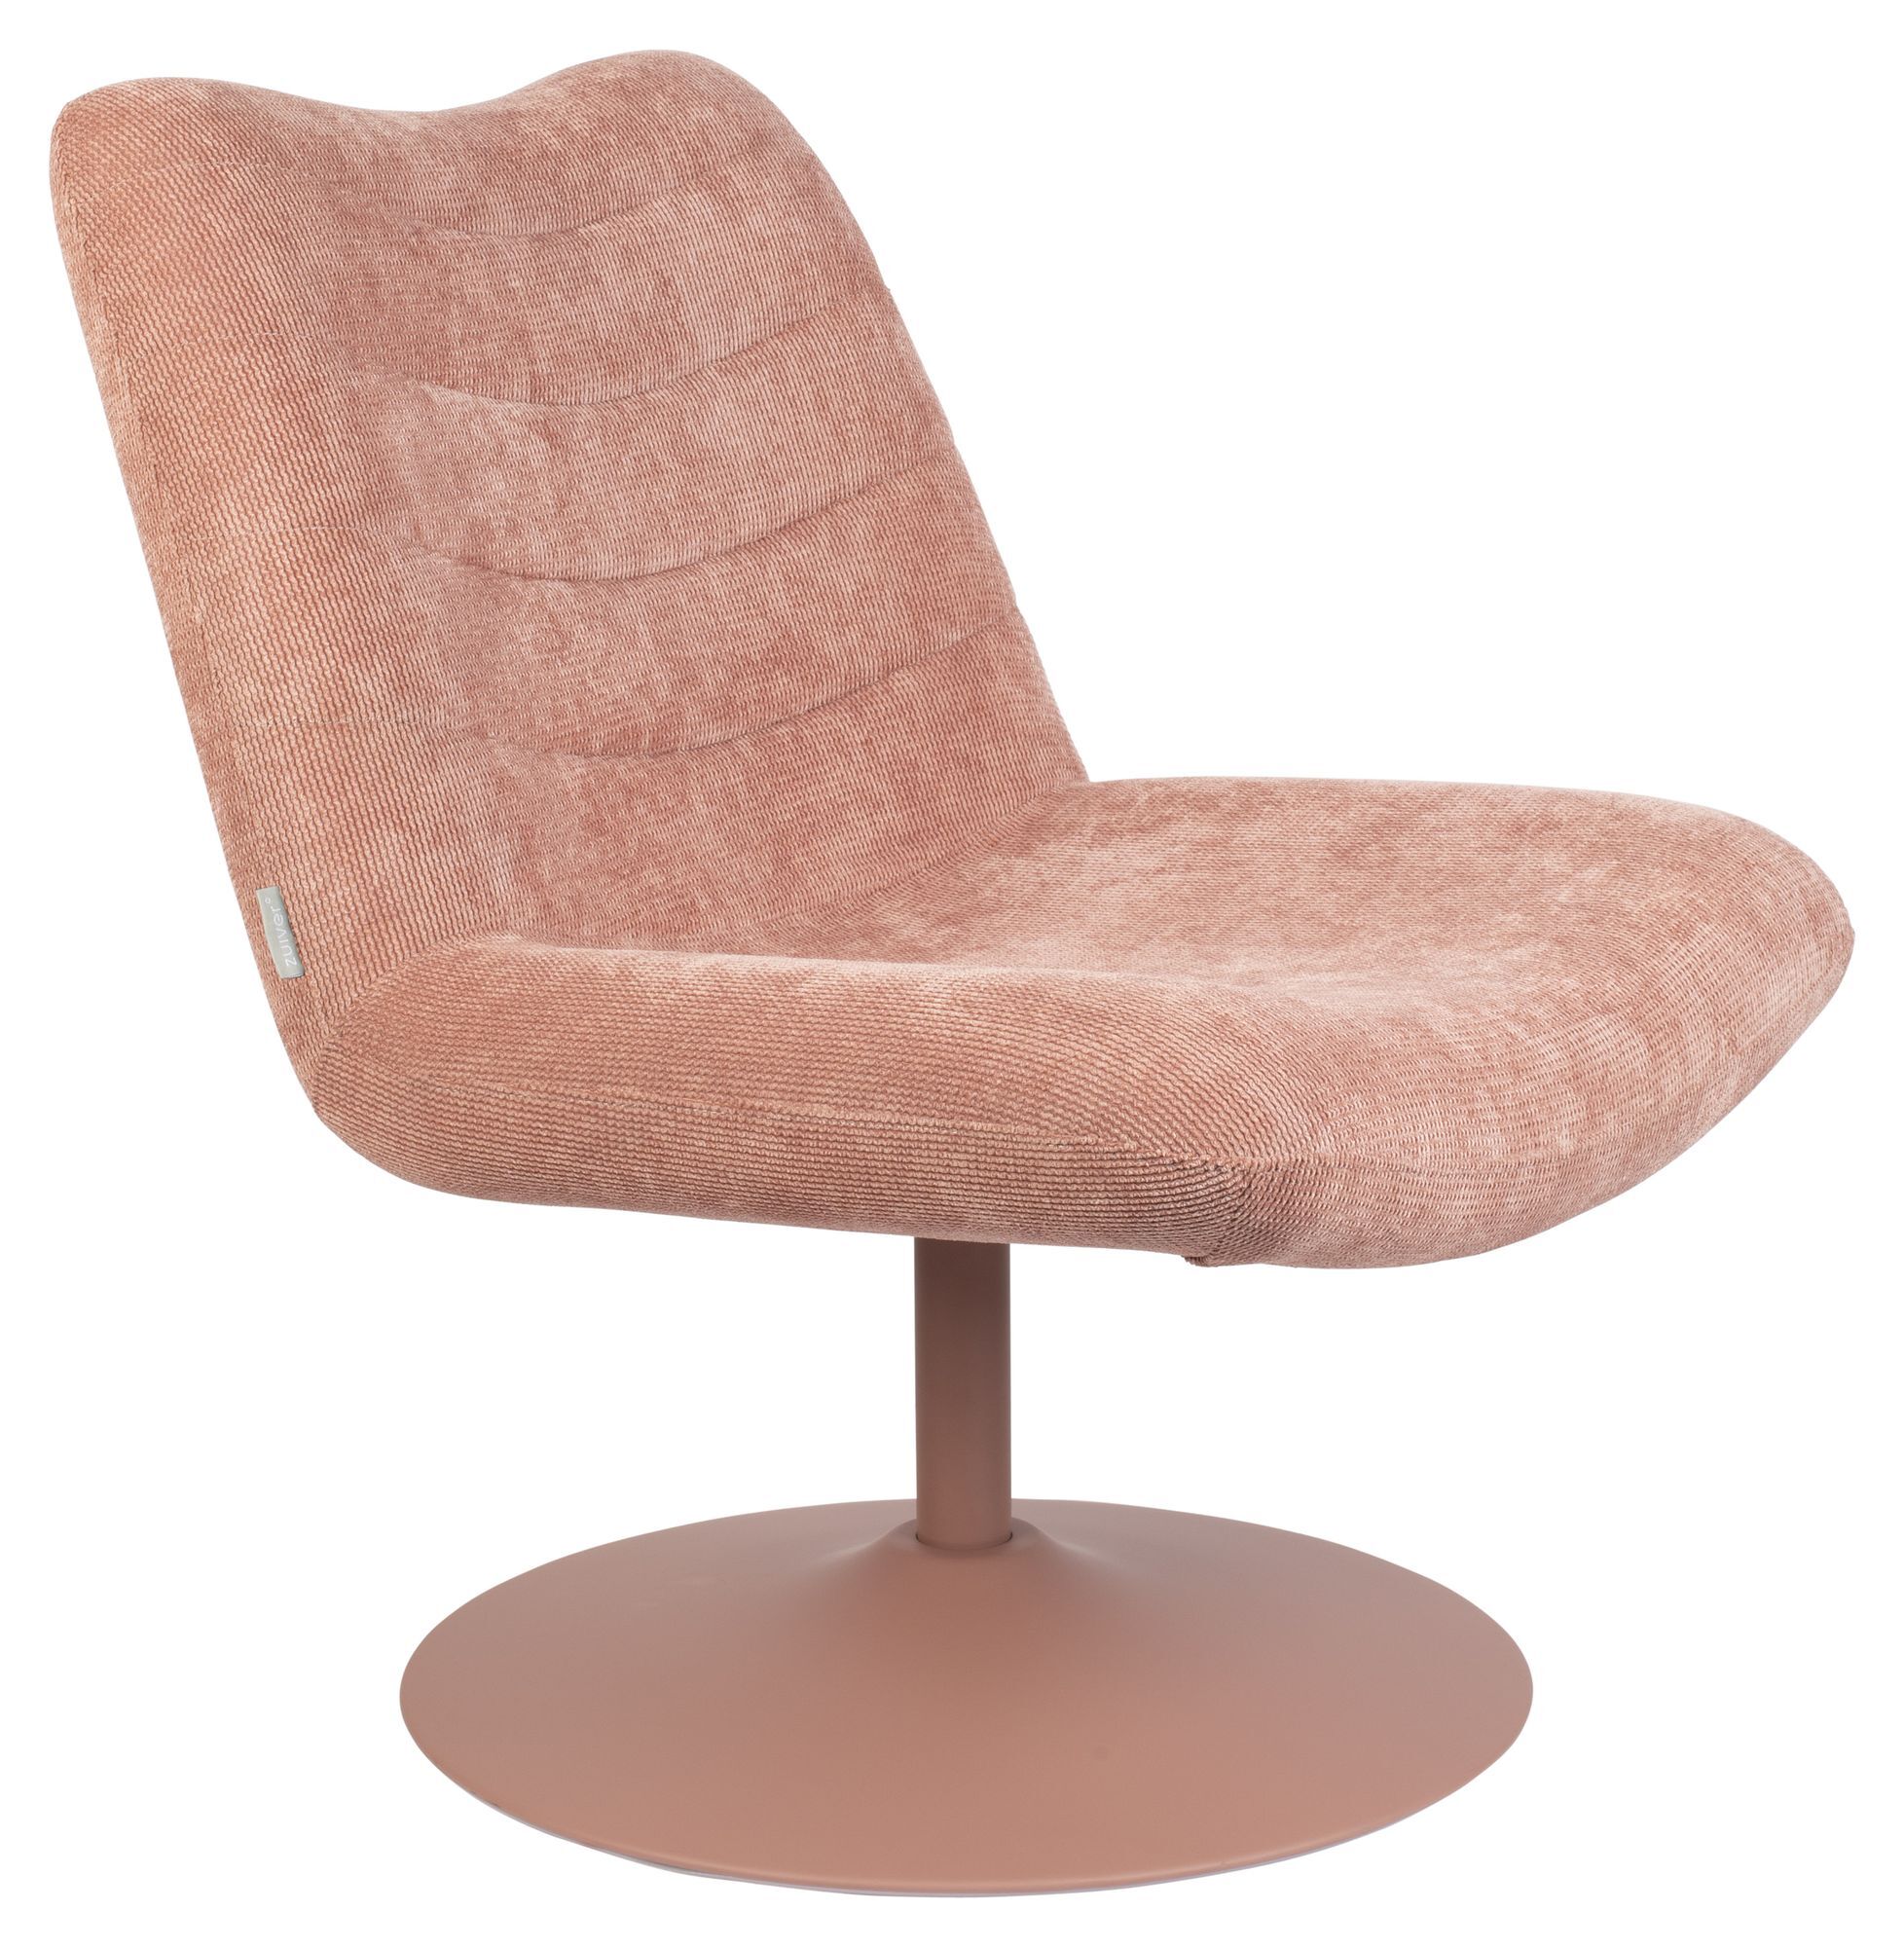 Zuiver Bubba Loungestol - Pink   Unoliving